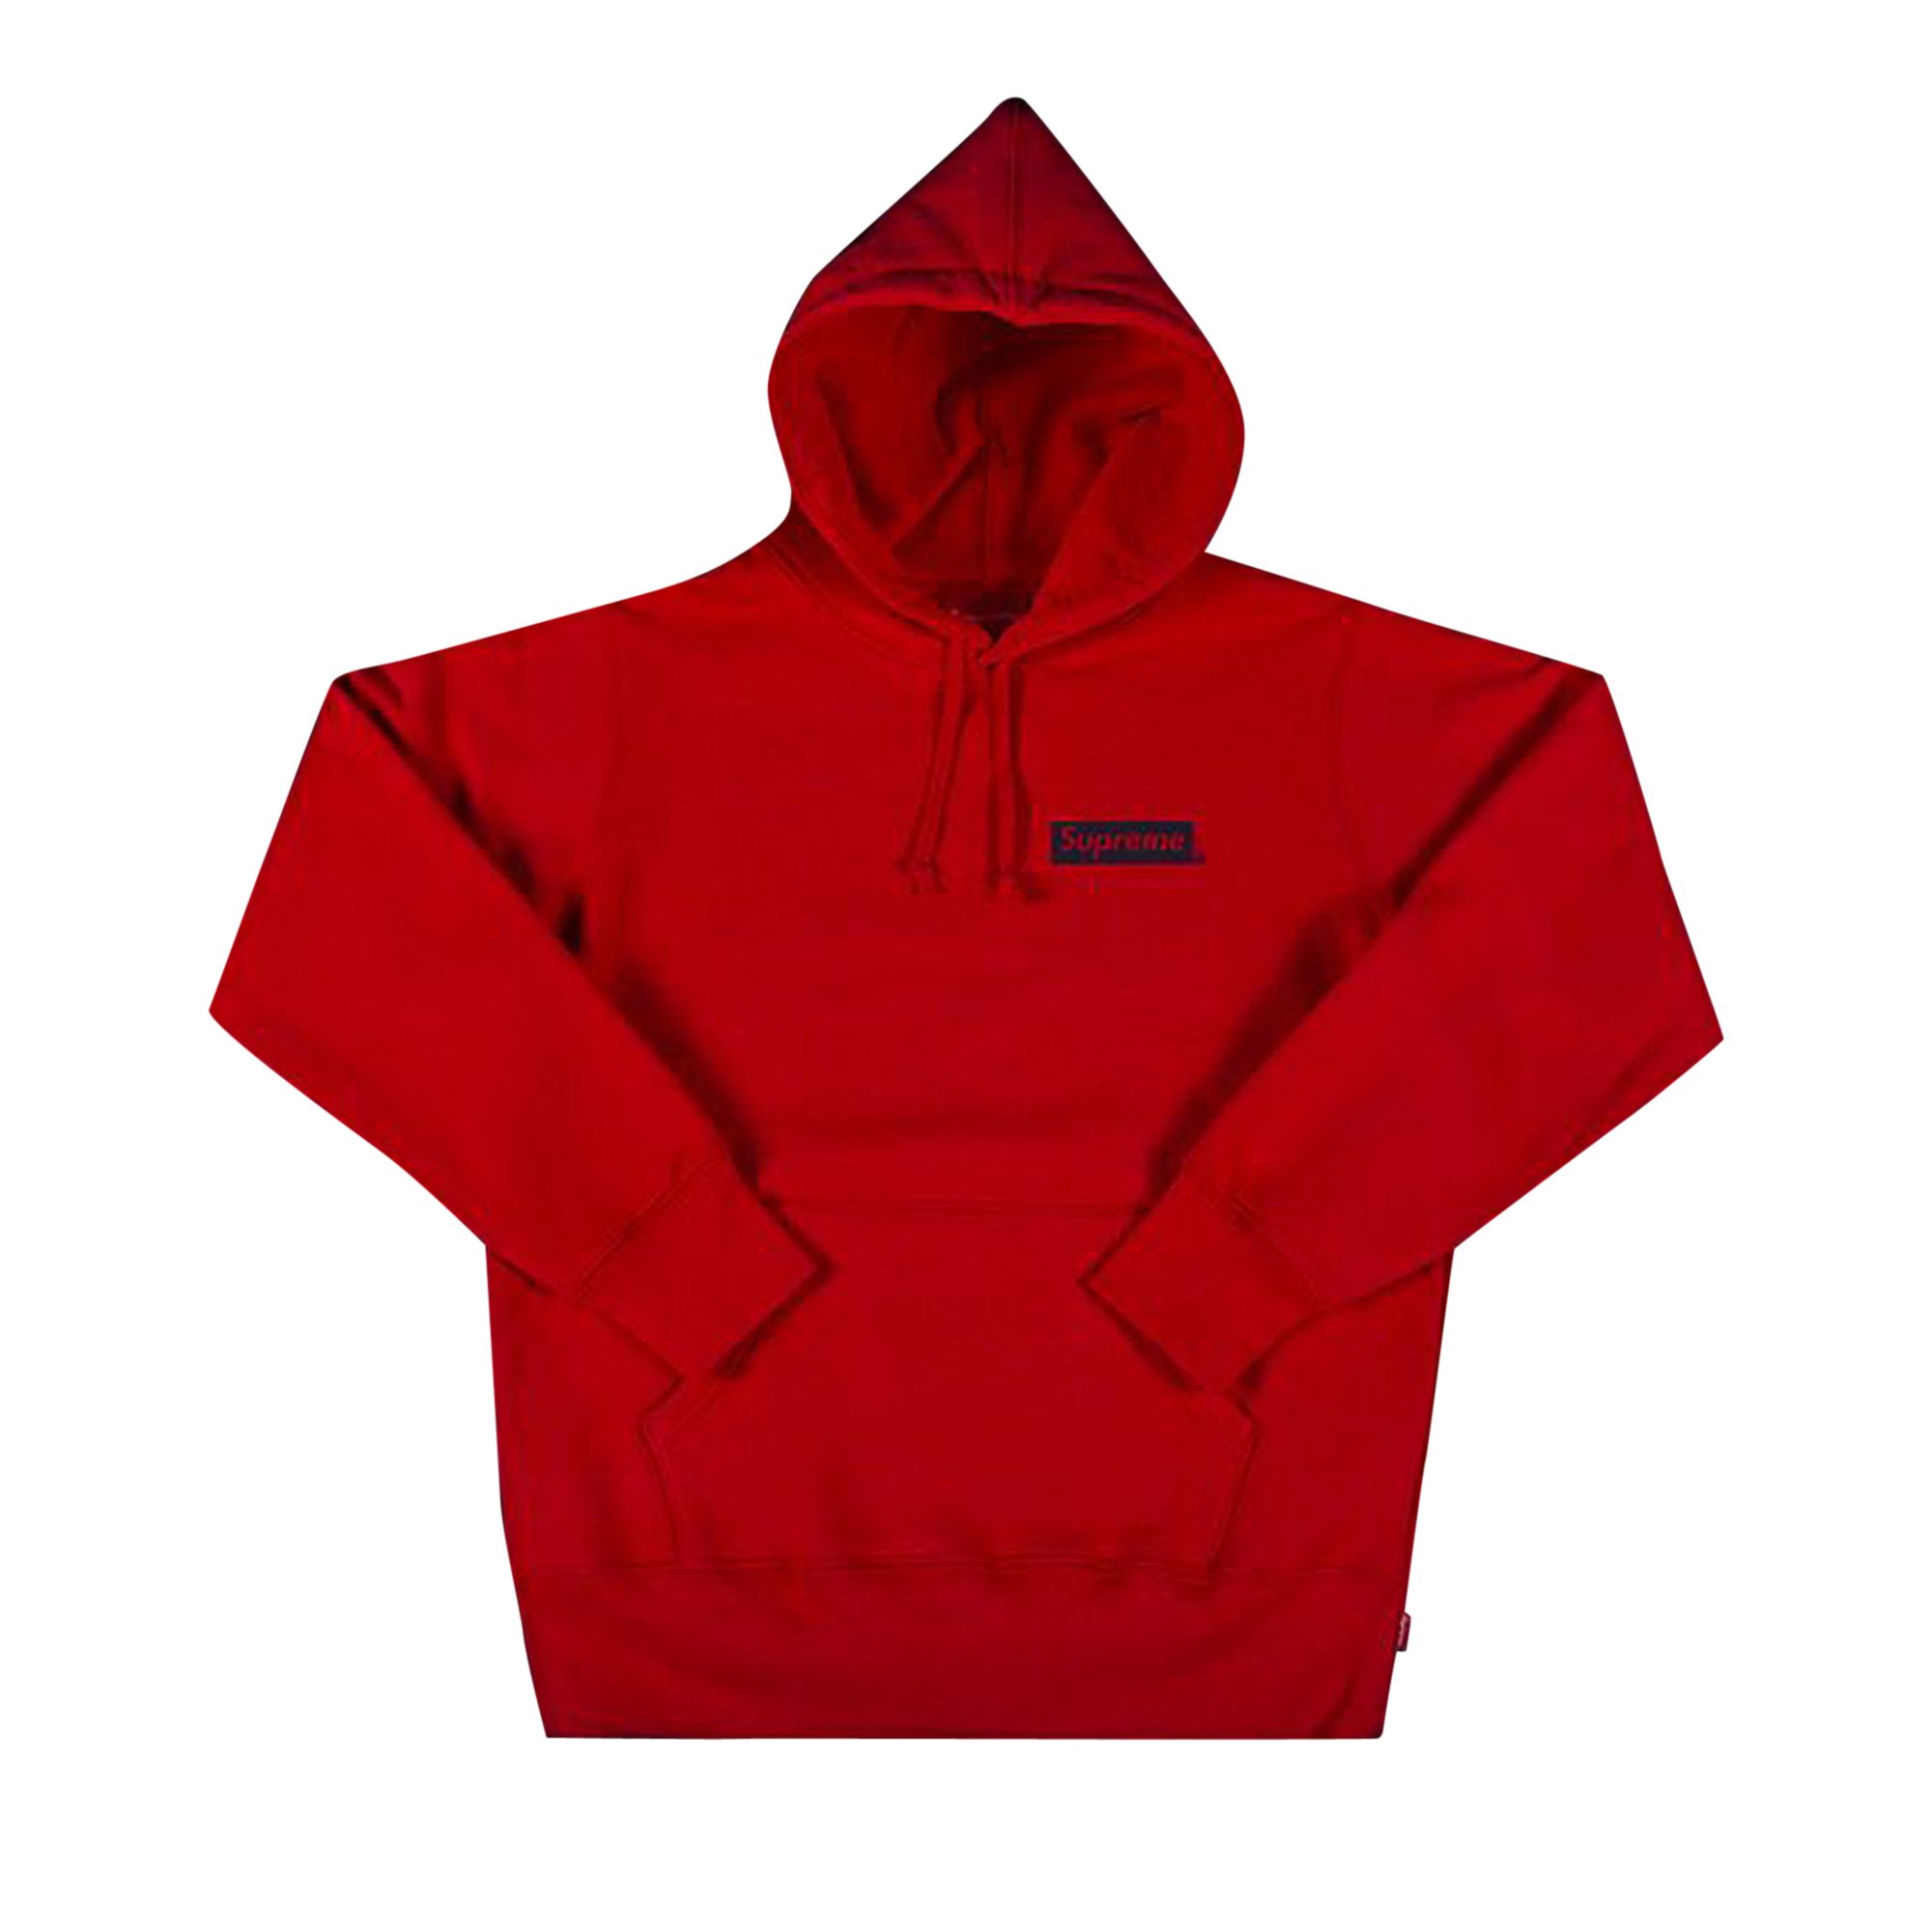 Buy Supreme Stop Crying Hooded Sweatshirt 'Red' - FW19SW62 RED | GOAT